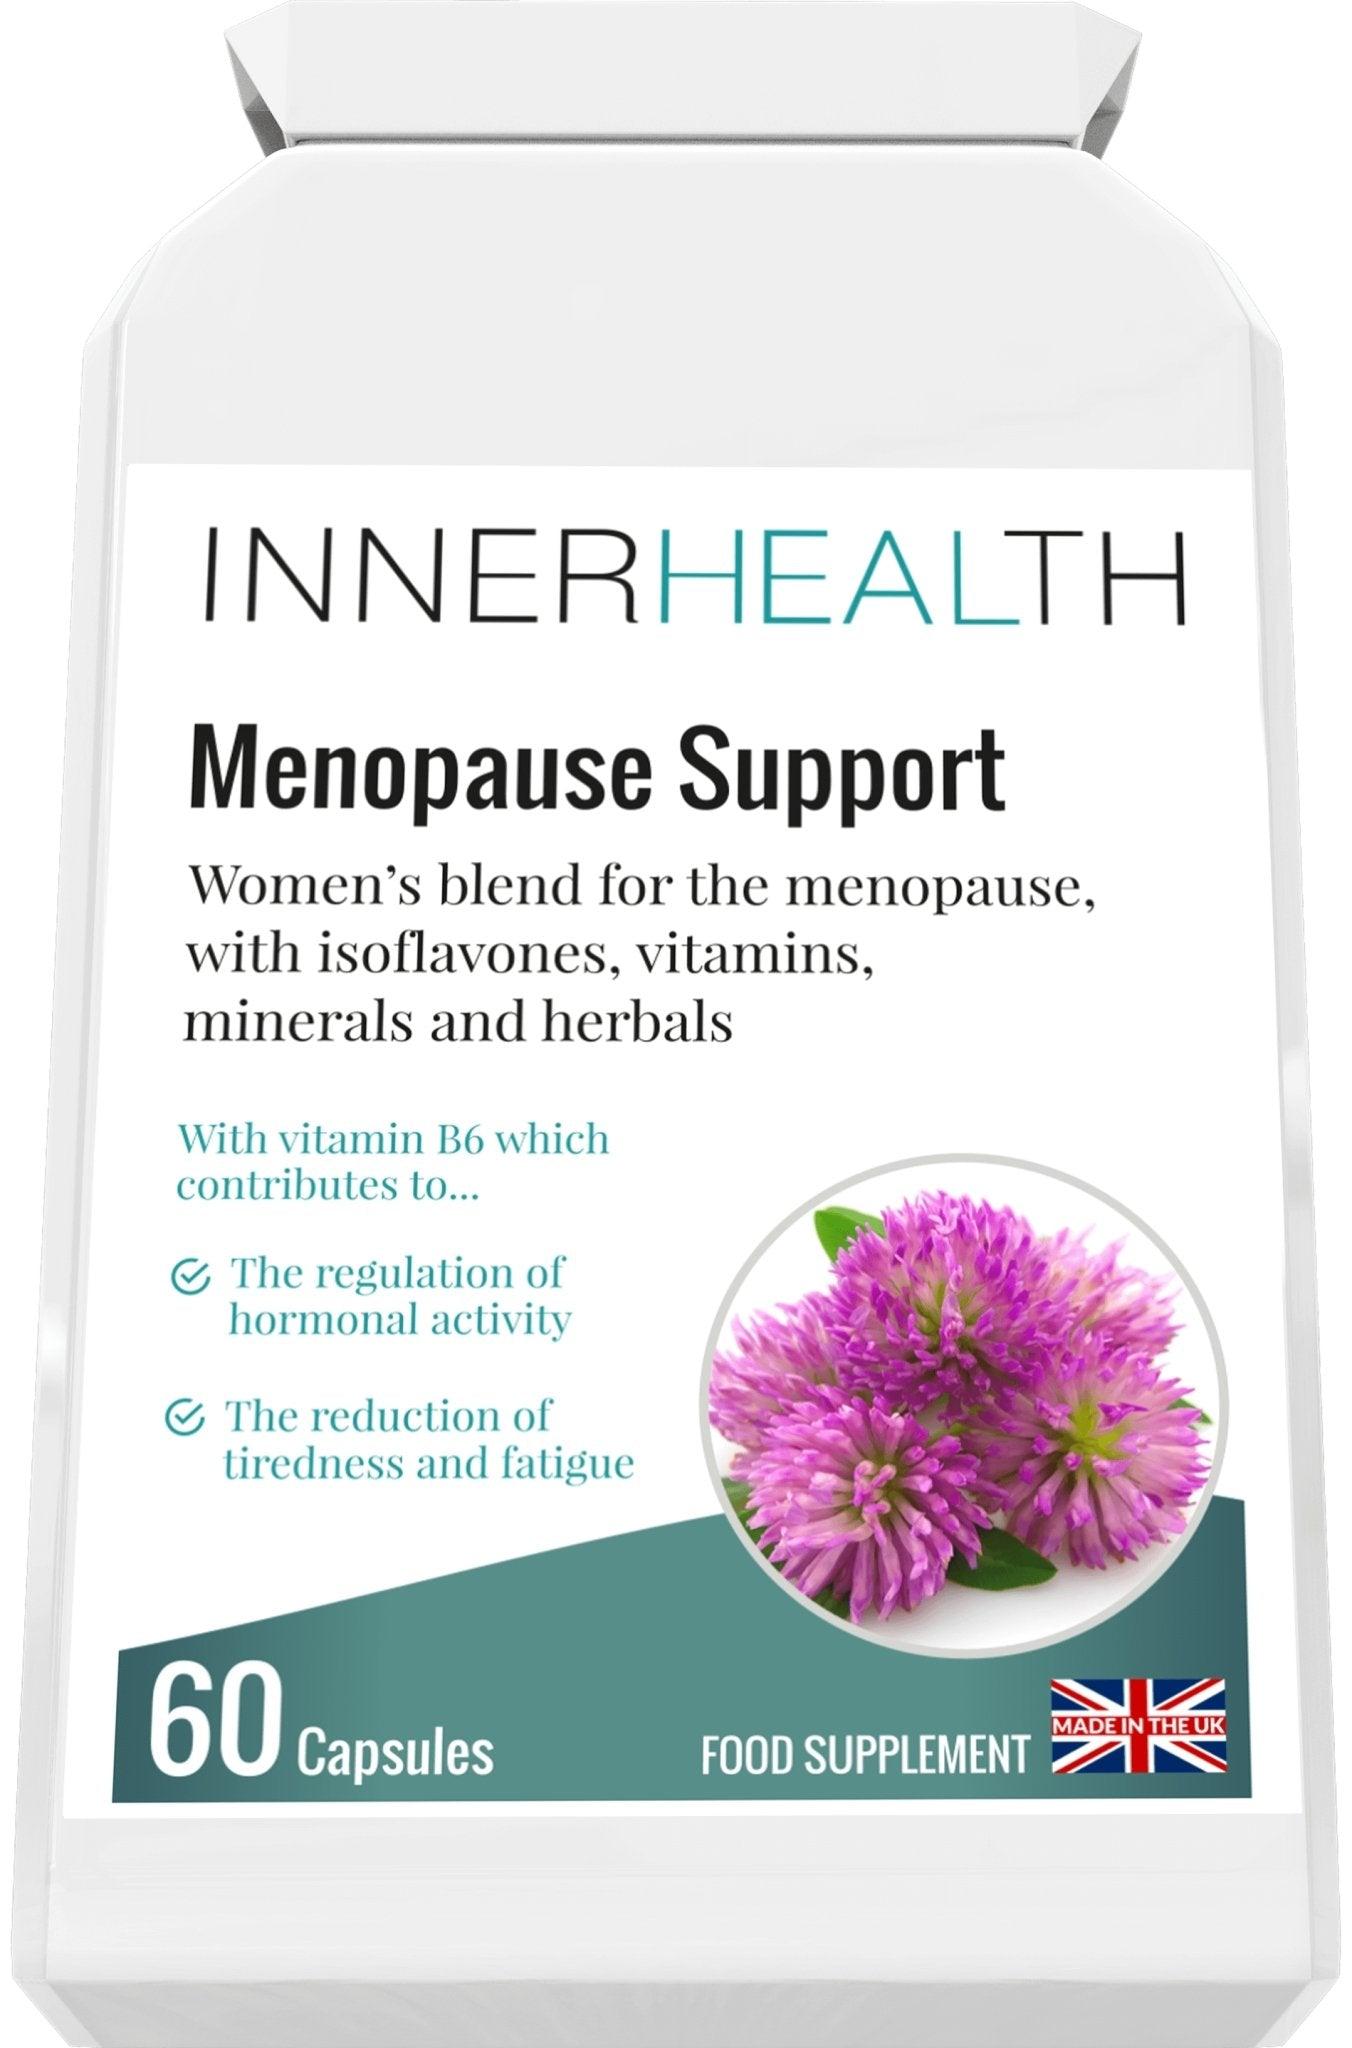 Menopause support - 60 Capsules - Inner Health Clinic